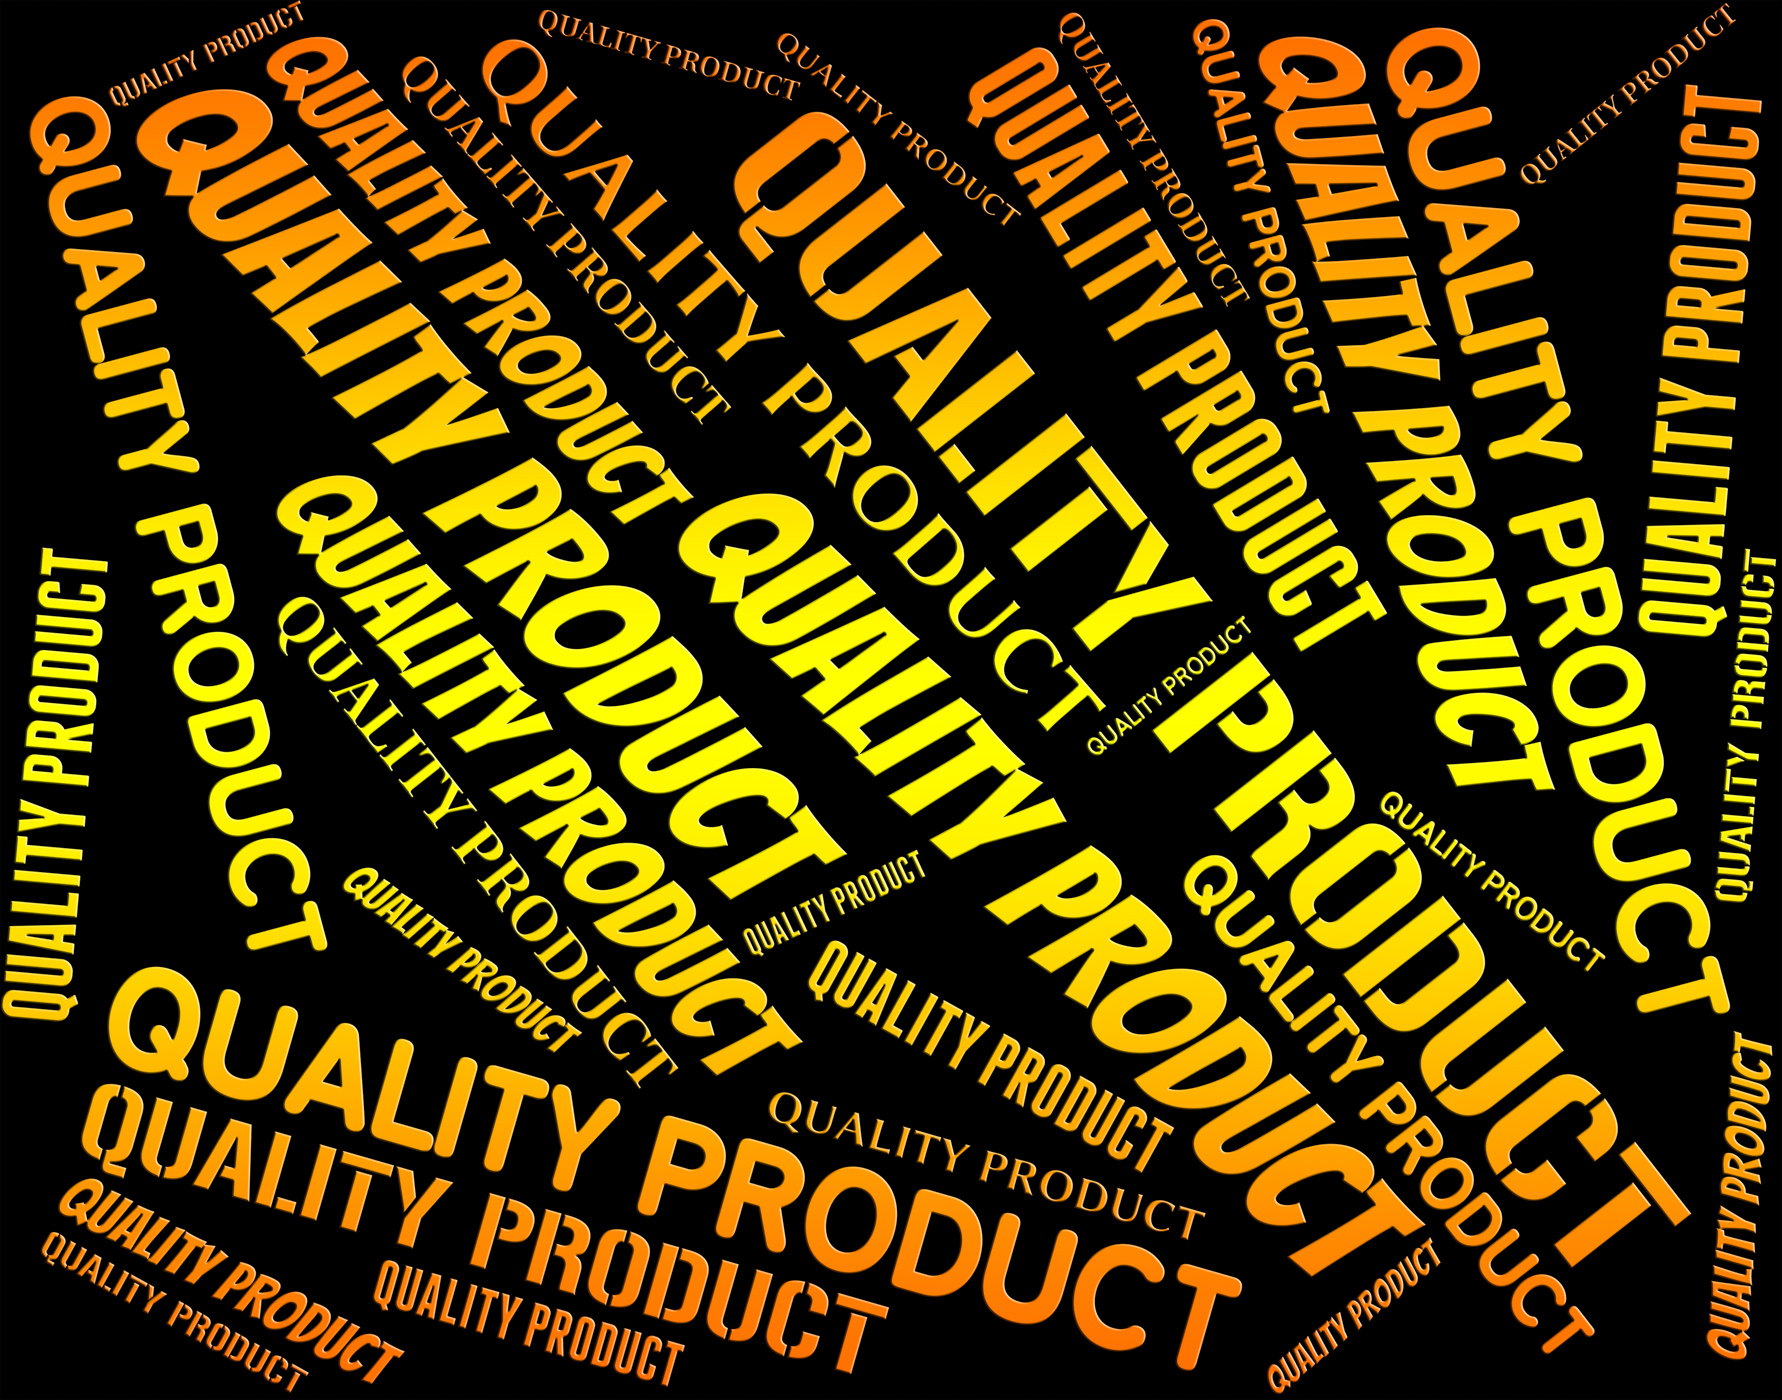 Quality product indicates stocks shop and words photo